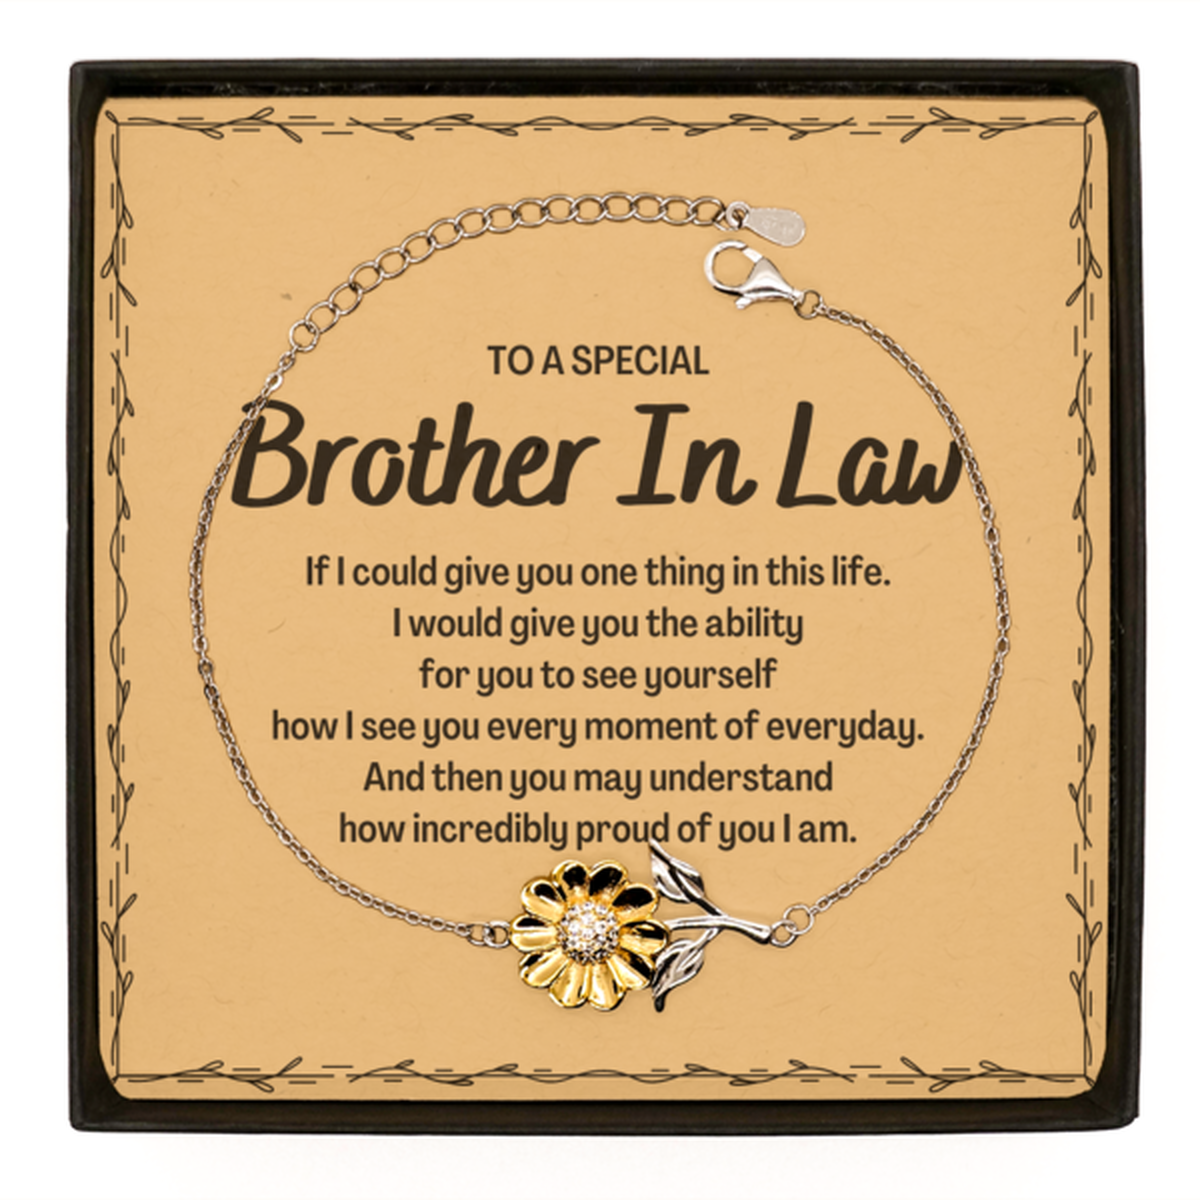 To My Brother In Law Sunflower Bracelet, Gifts For Brother In Law Message Card, Inspirational Gifts for Christmas Birthday, Epic Gifts for Brother In Law To A Special Brother In Law how incredibly proud of you I am